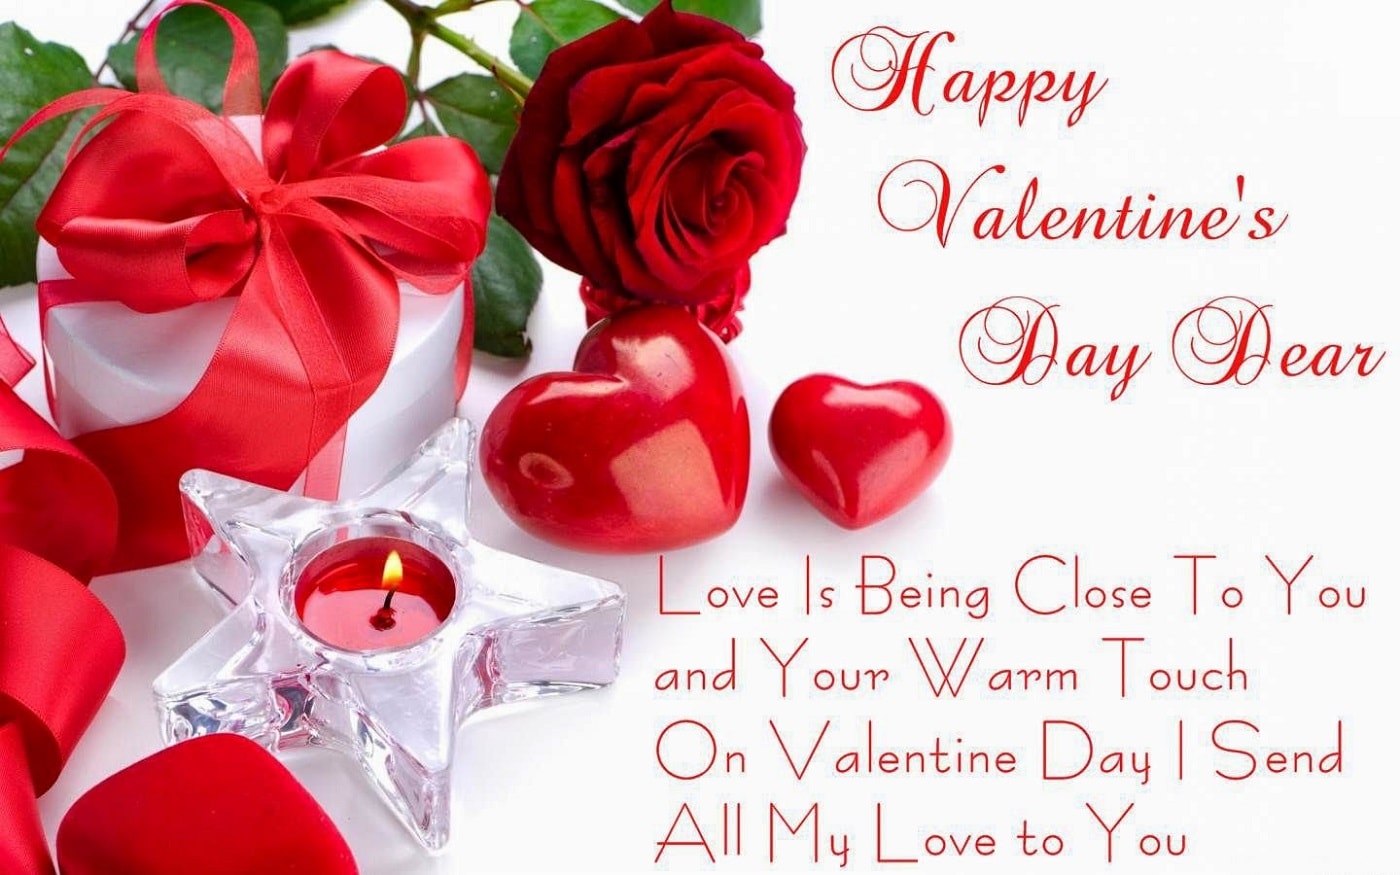 Happy Valentine's Day Quotes for Friends for 2018